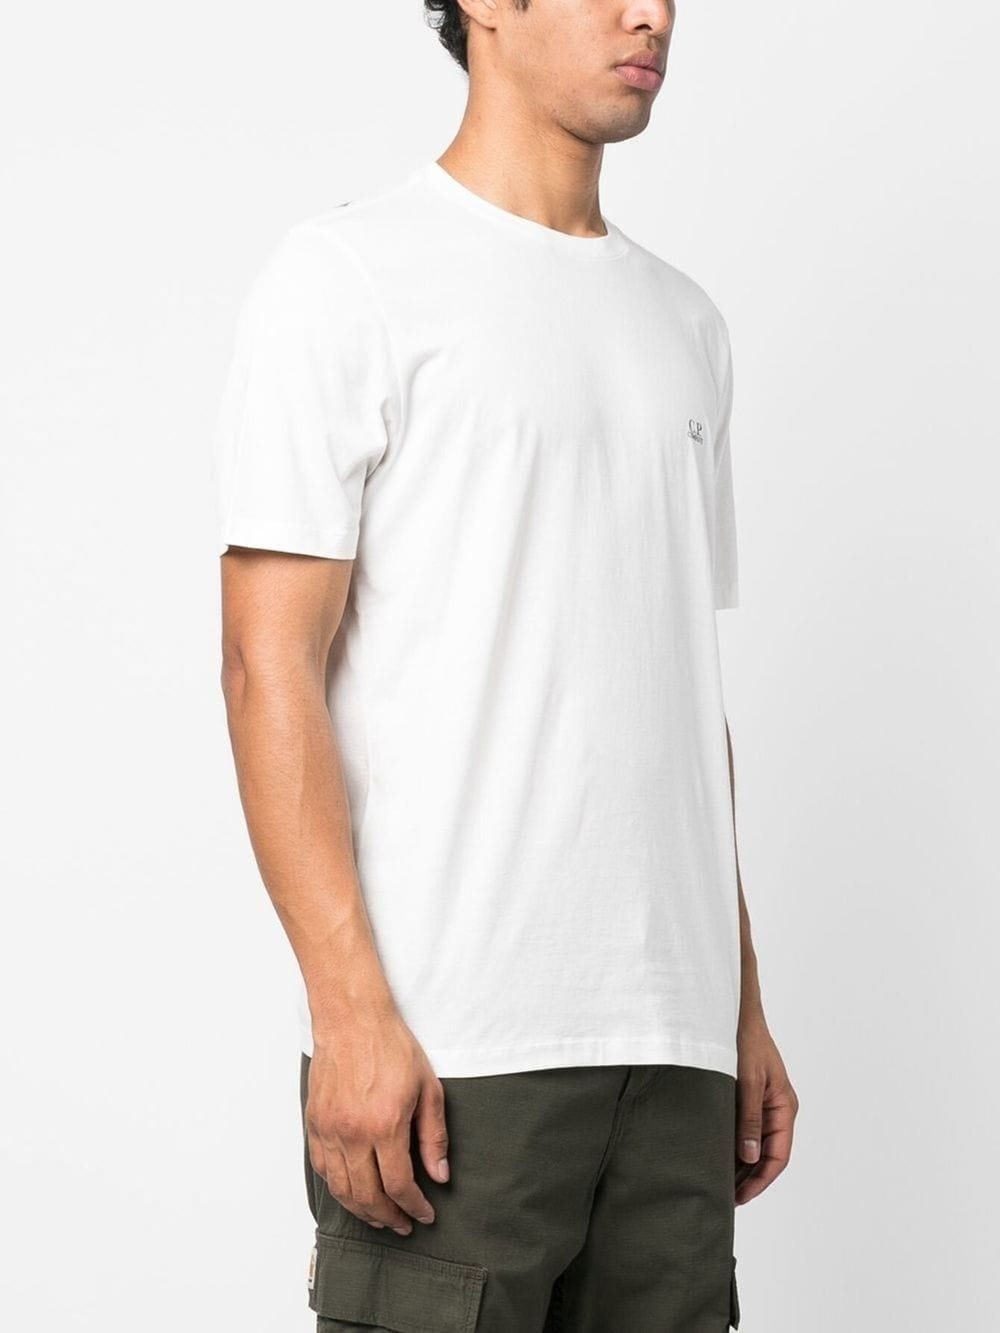 C.P. Company -T-shirt 30/1 Jersey Goggle White - Lothaire